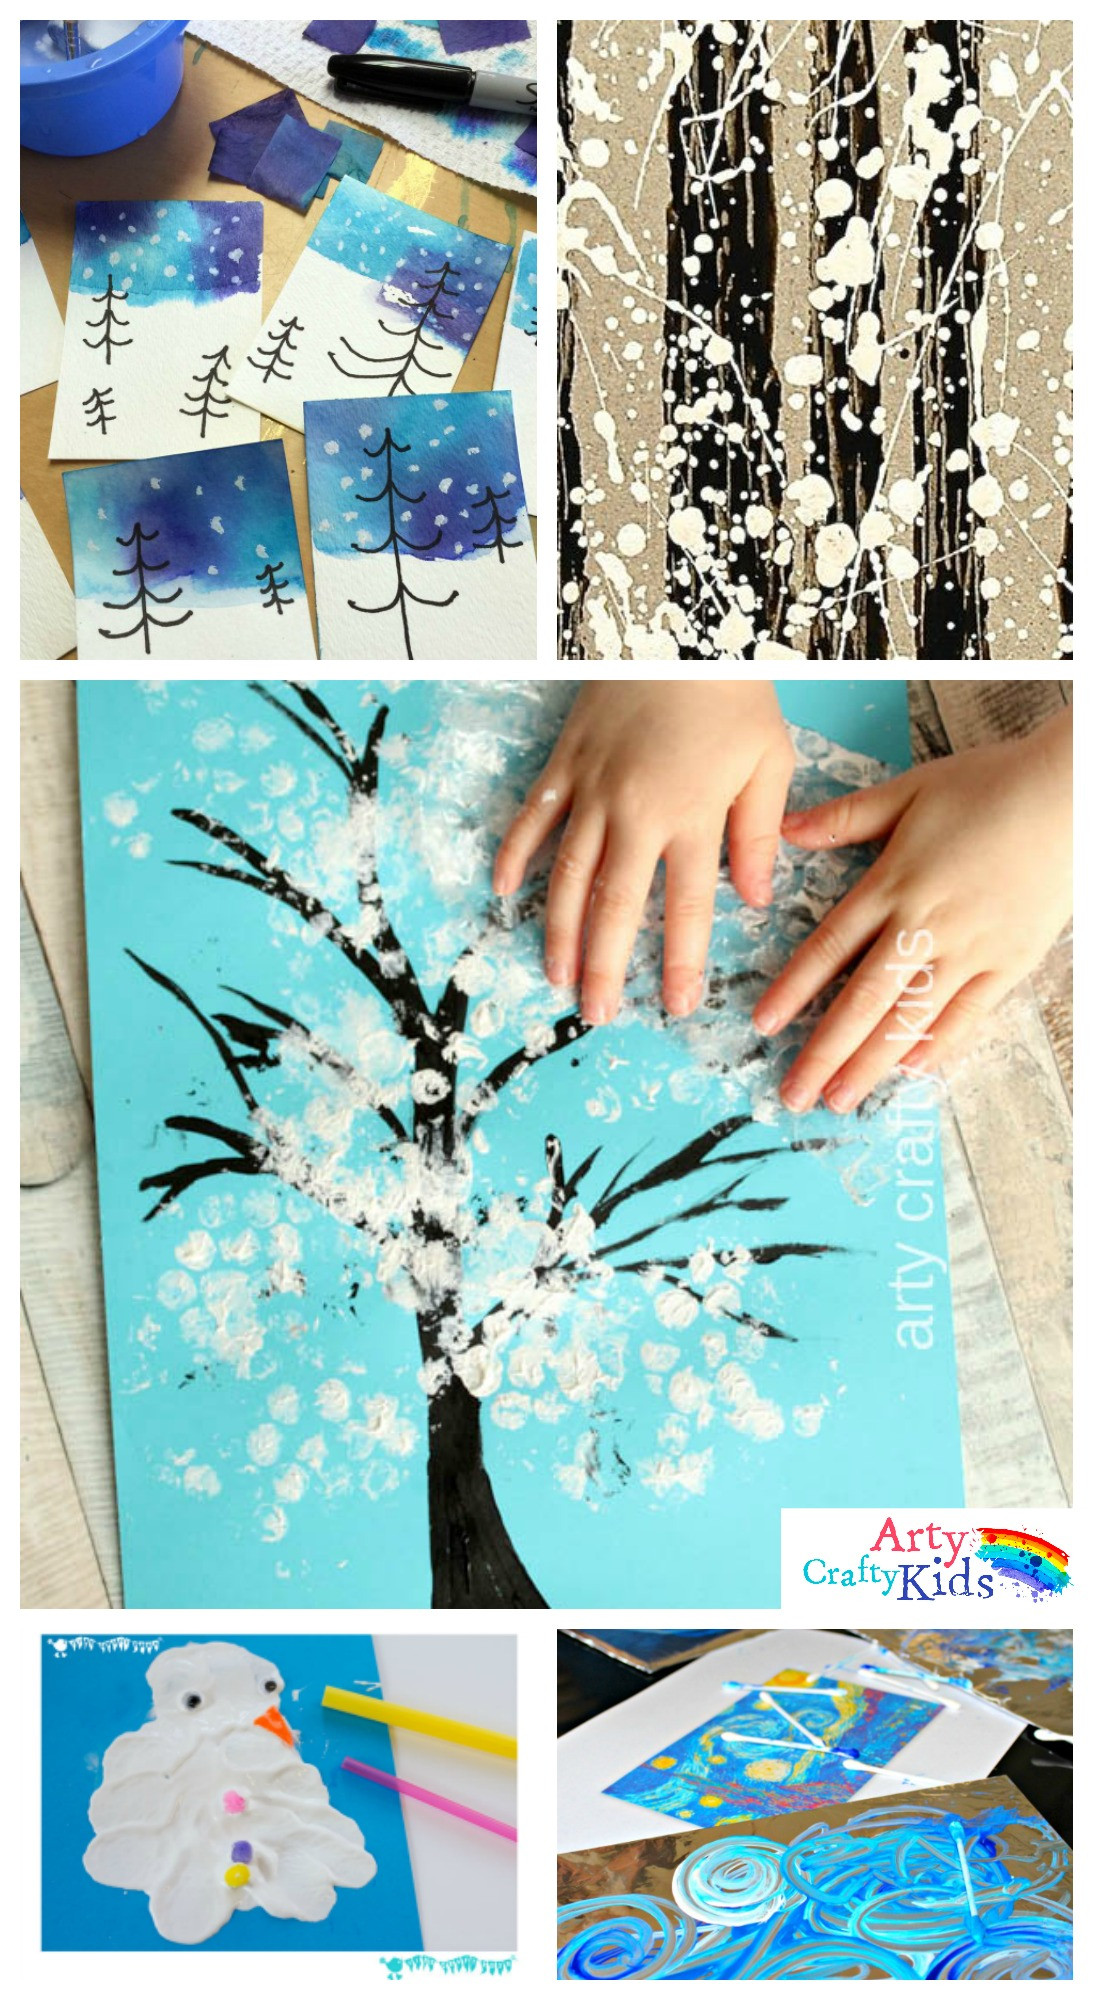 Toddler Art And Craft Ideas
 14 Wonderful Winter Art Projects for Kids Arty Crafty Kids